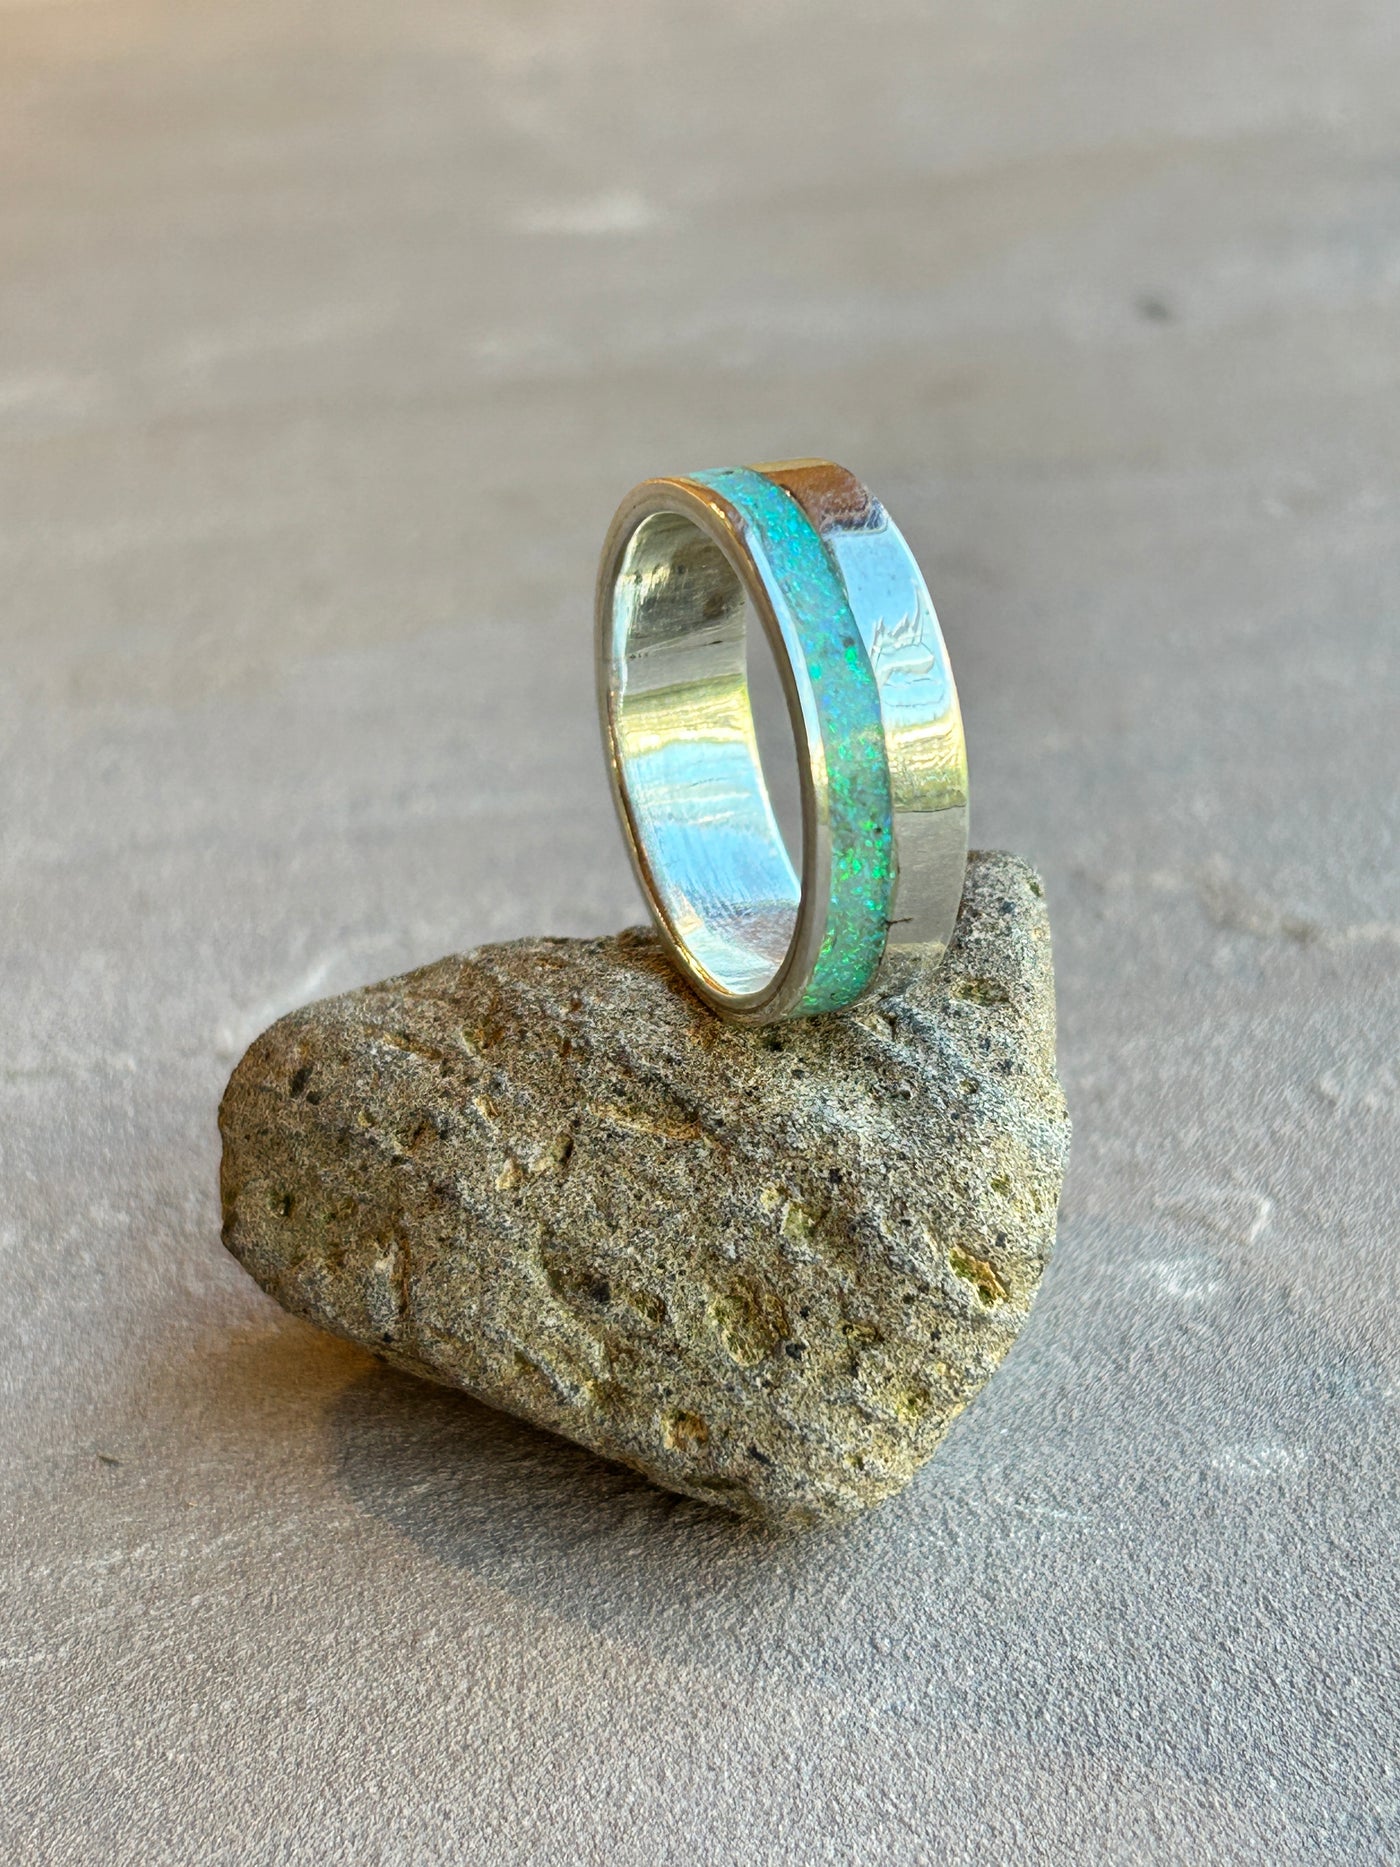 Crushed opal offset inlay band ring